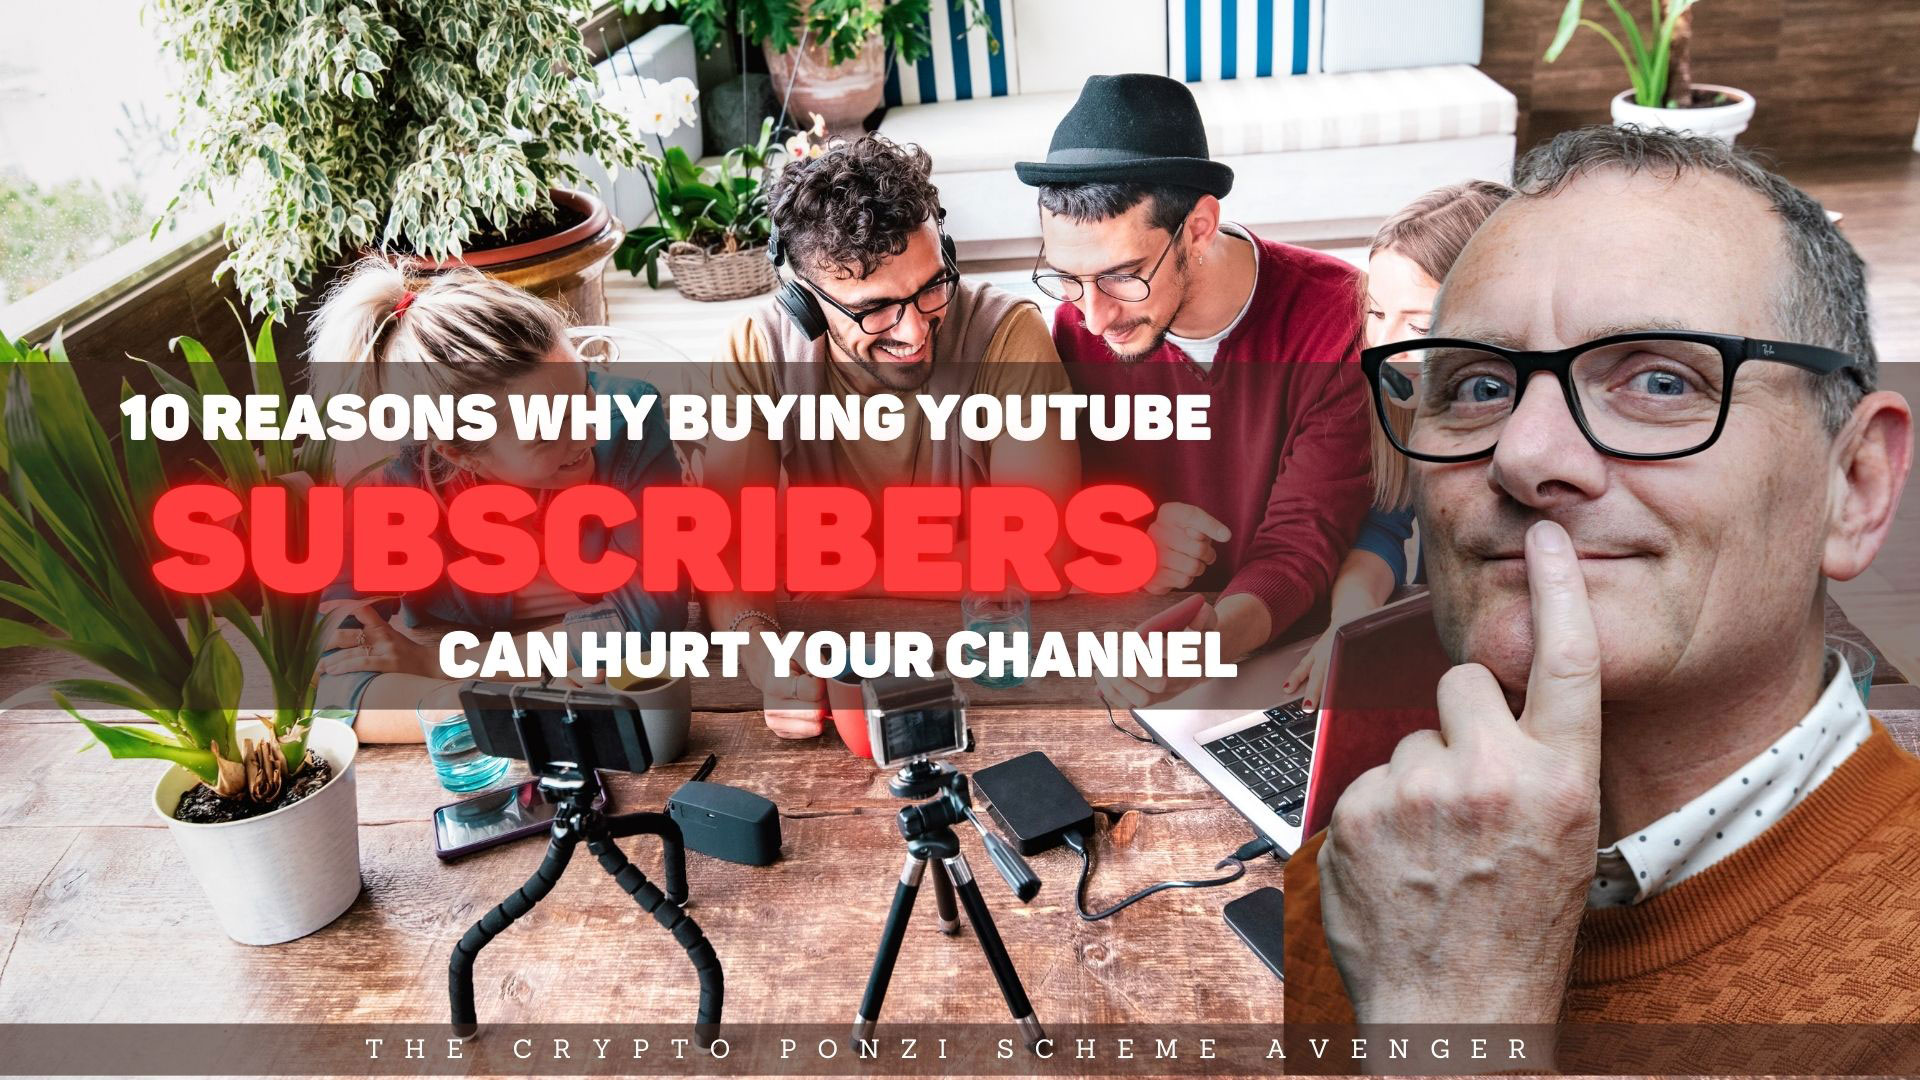 10 Reasons Why Buying YouTube Subscribers Can Hurt Your Channel Entrepreneur Decision Maker Connector Podcaster Educator